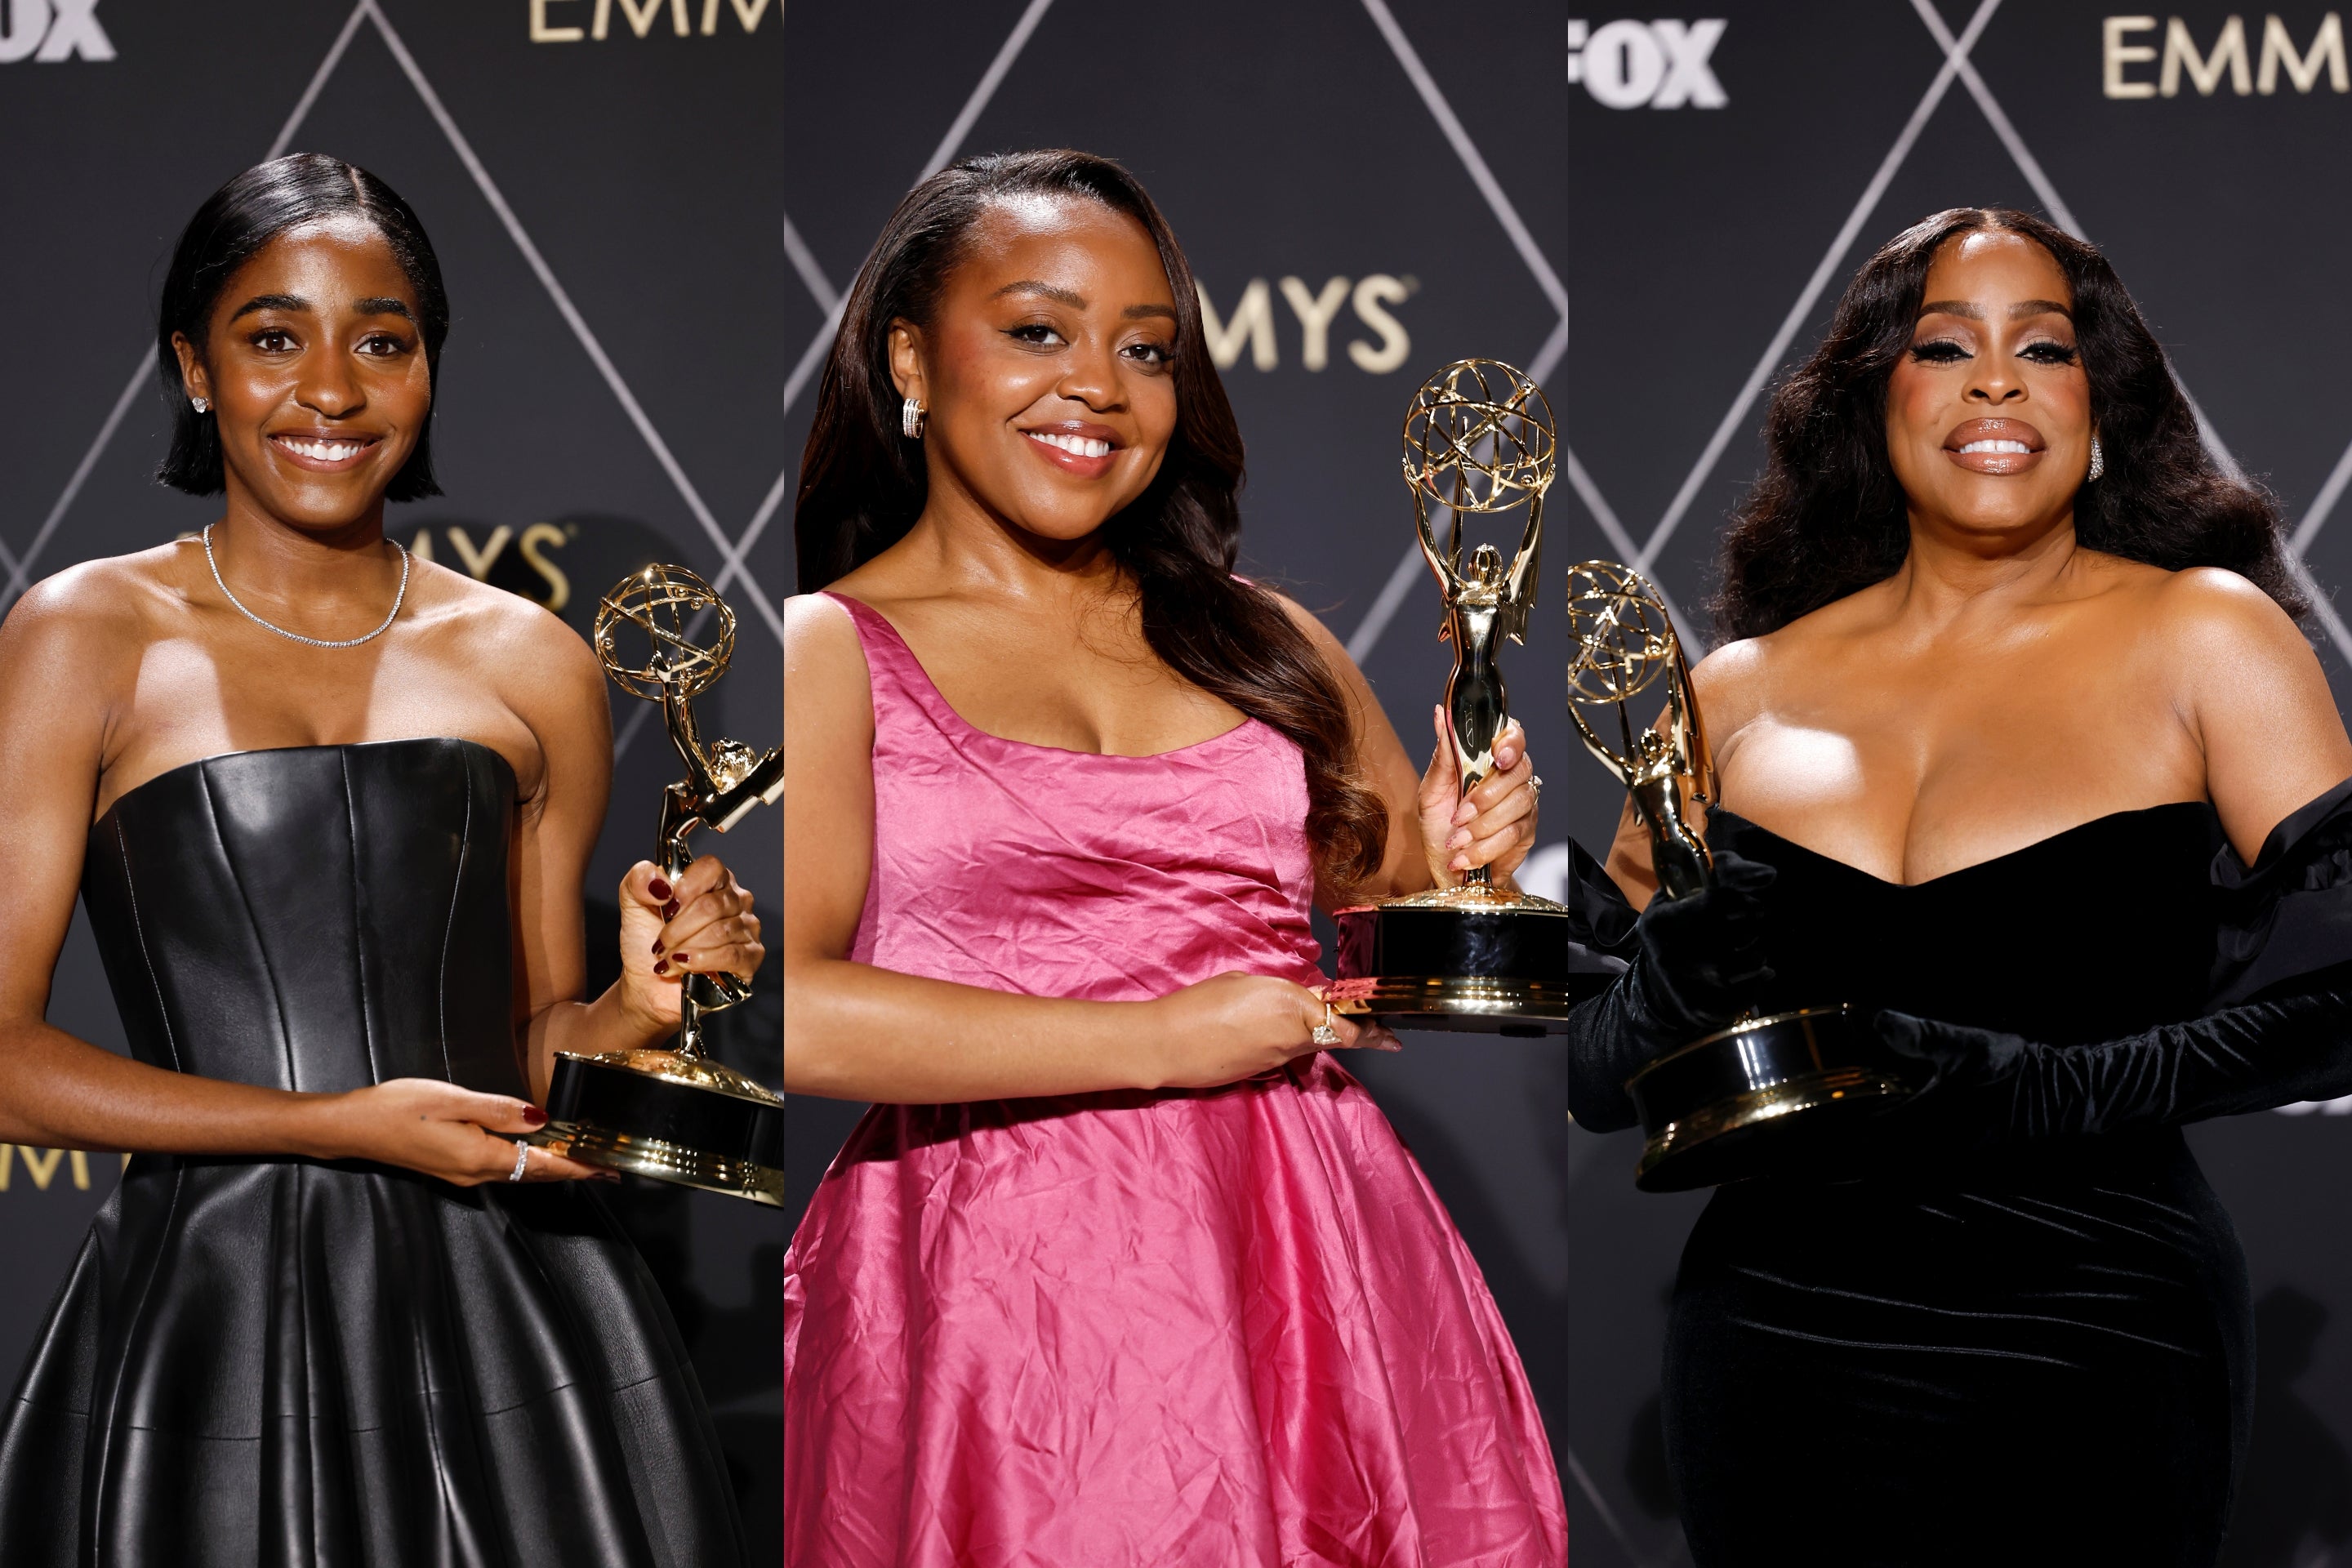 That Had to Have Been the Blackest Emmys Ever, Right? Nadira Goffe